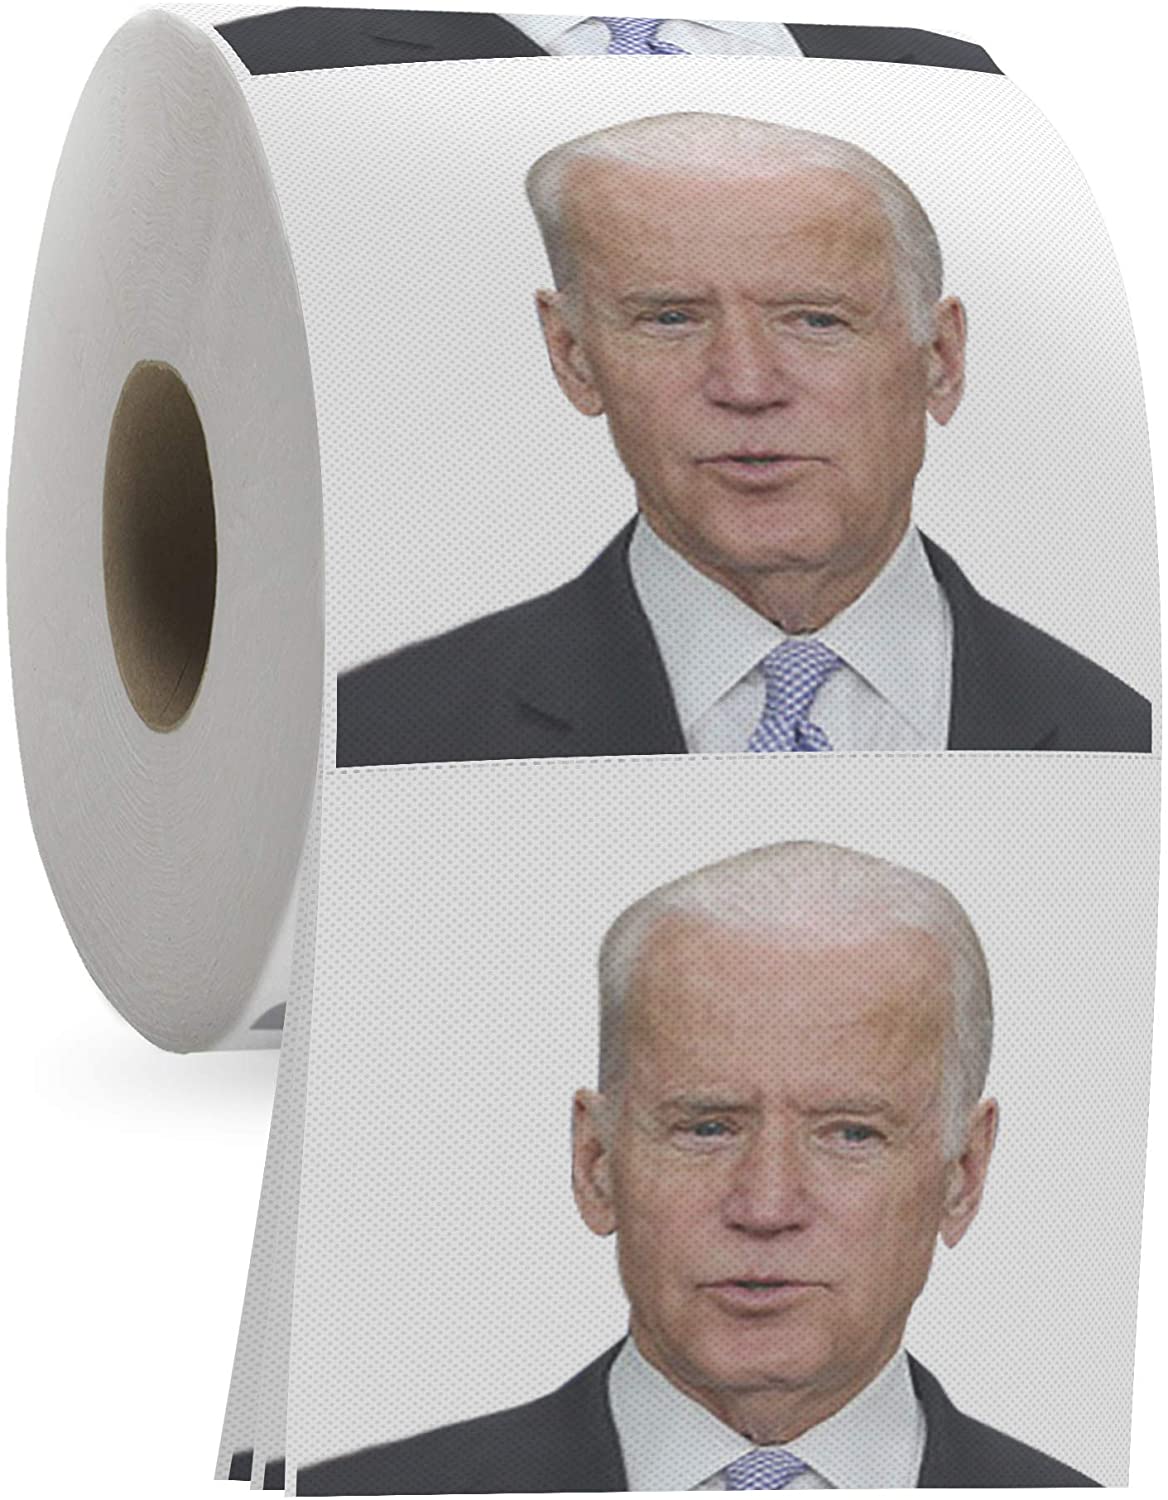 Joe Biden Toilet Paper Roll - Funny Political Novelty Gag Gift - 3 Ply Bathroom Tissue 200 Sheets in Each Roll - Laugh Out Loud Joke with Image Printed on Every Sheet | Hilarious White Elephant Idea